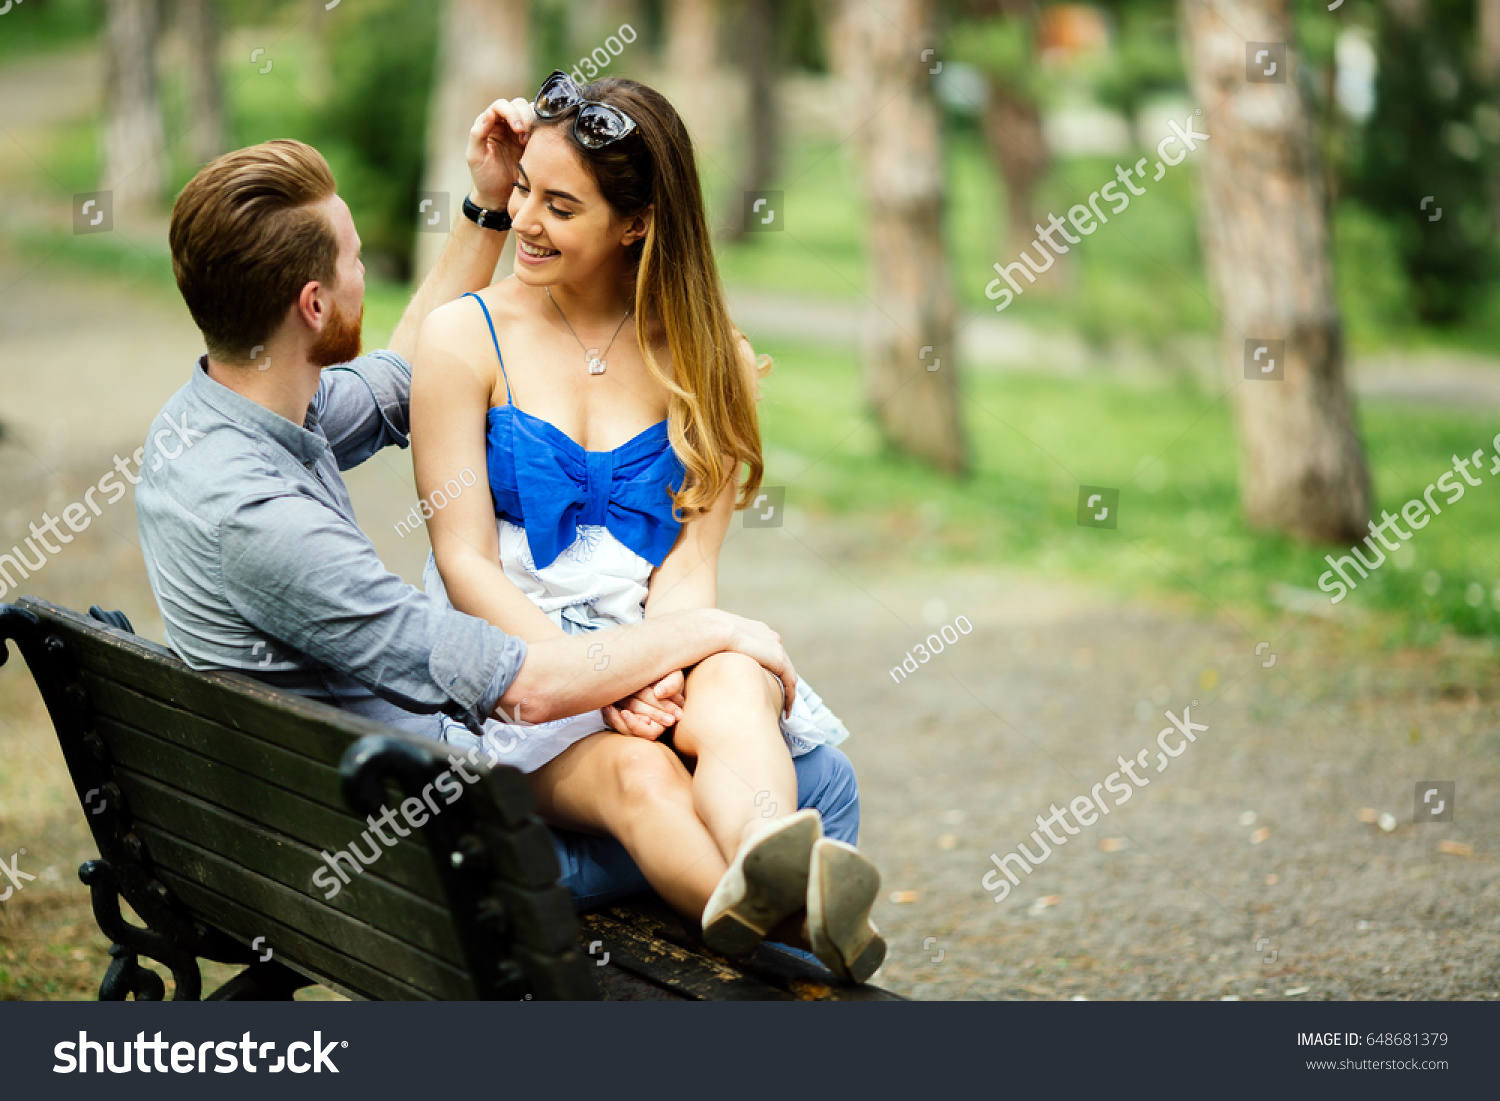 Dating couple sitting on bench #648681379